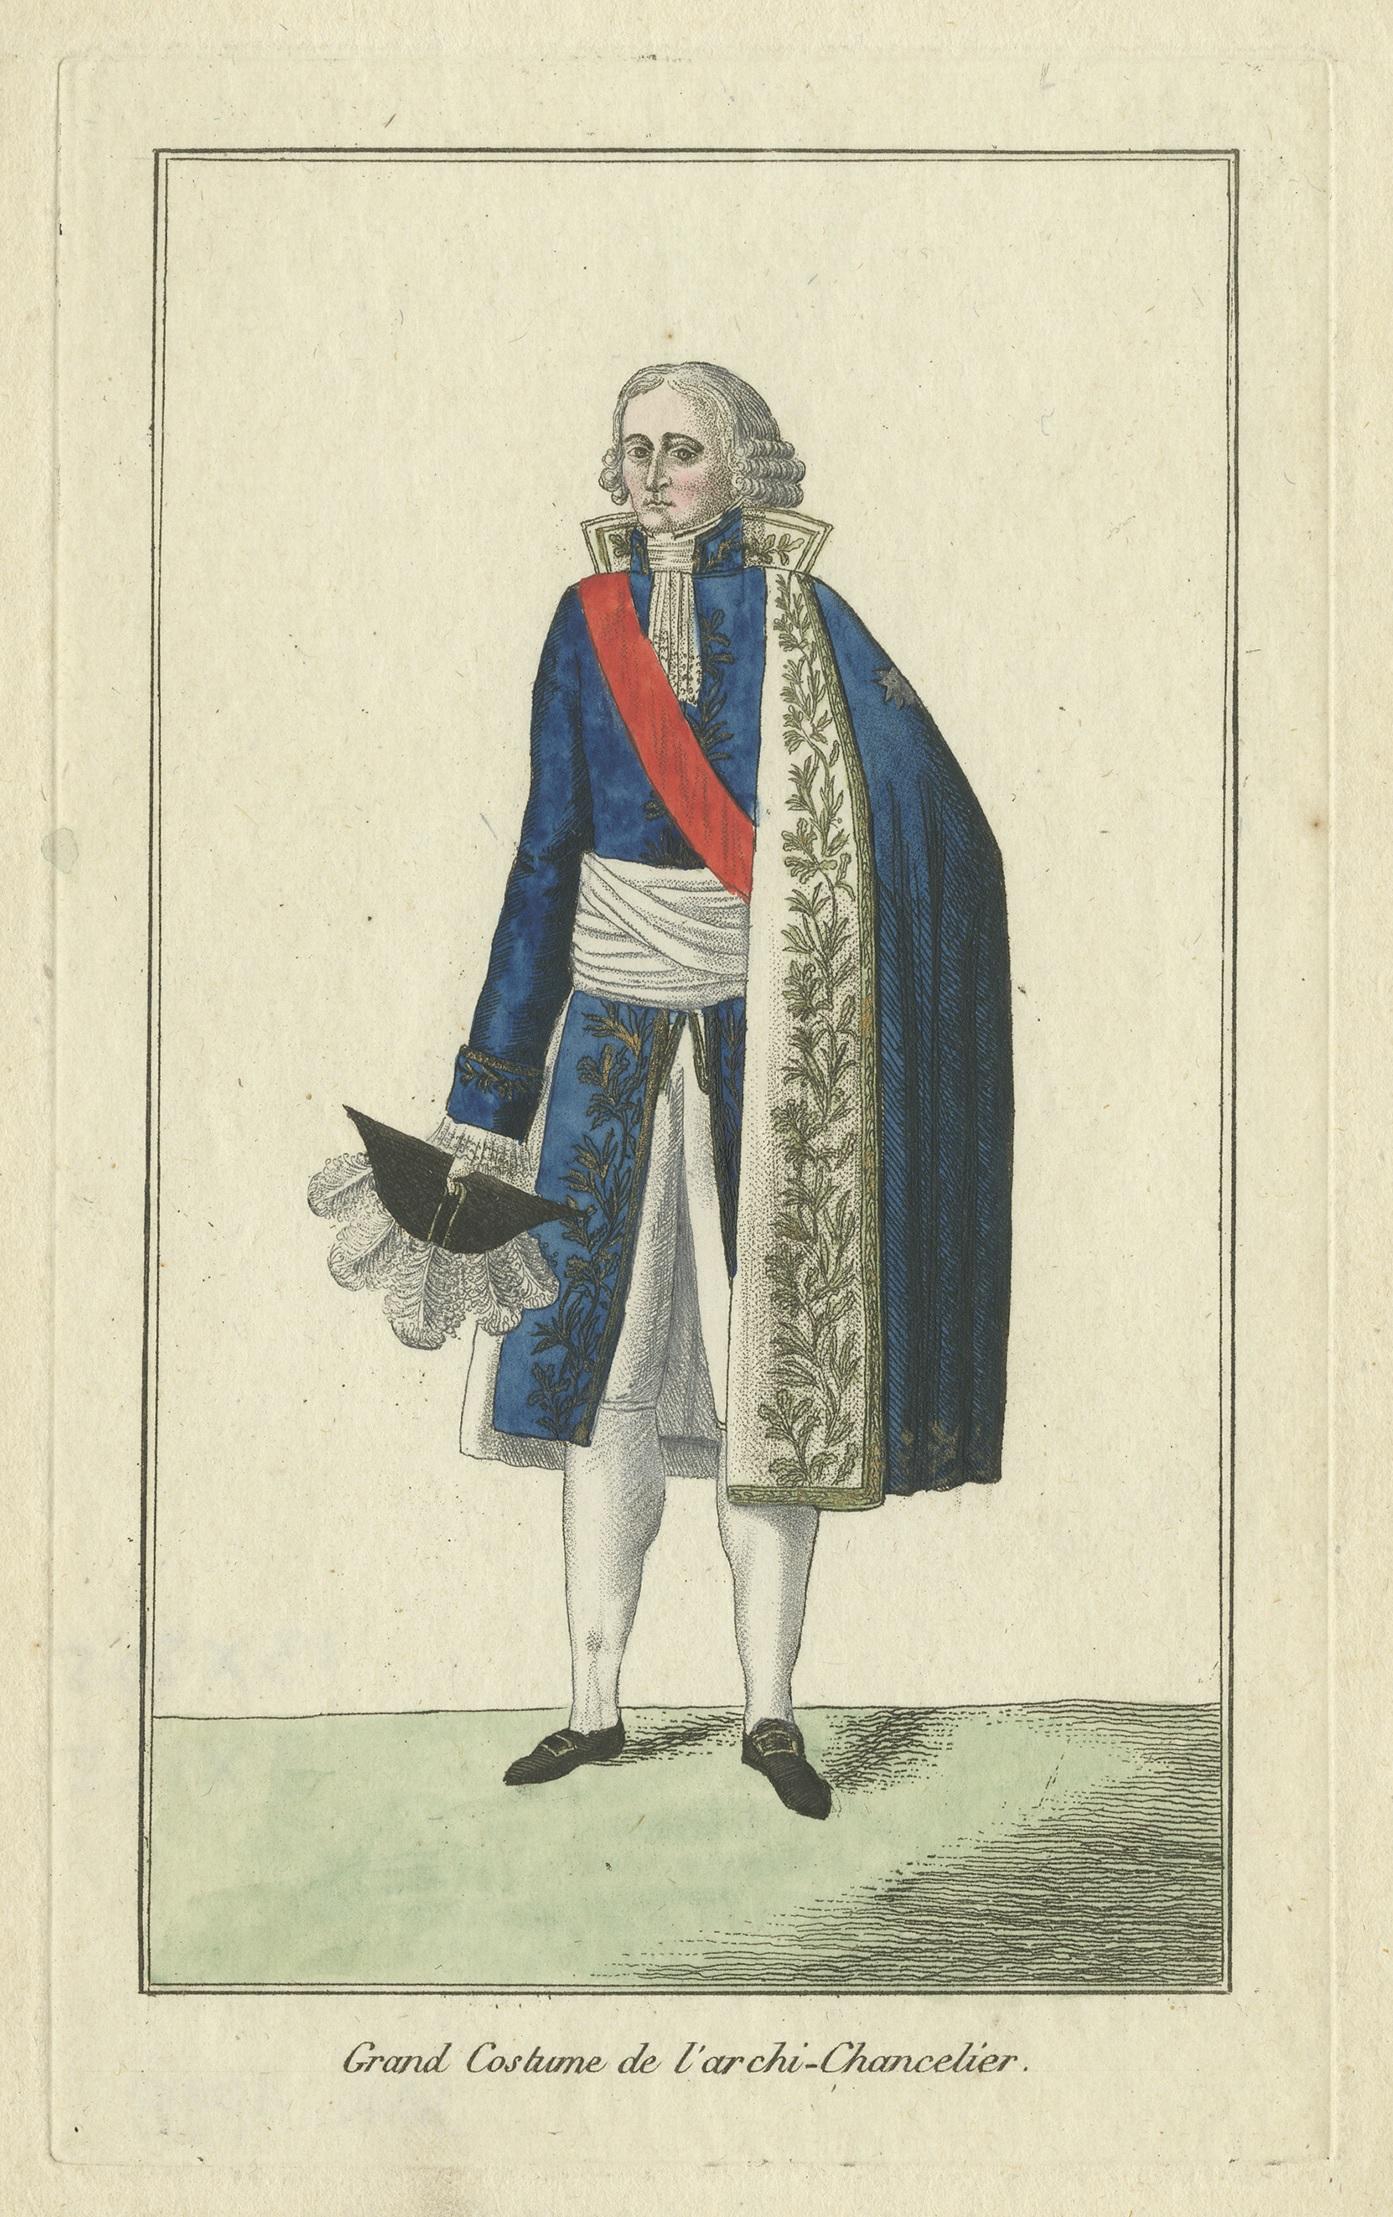 Antique print titled 'Grand Costume de l'archi-chancelier'. Costume print of a French chancellor. This print originates from a small booklet with engravings of French costumes.